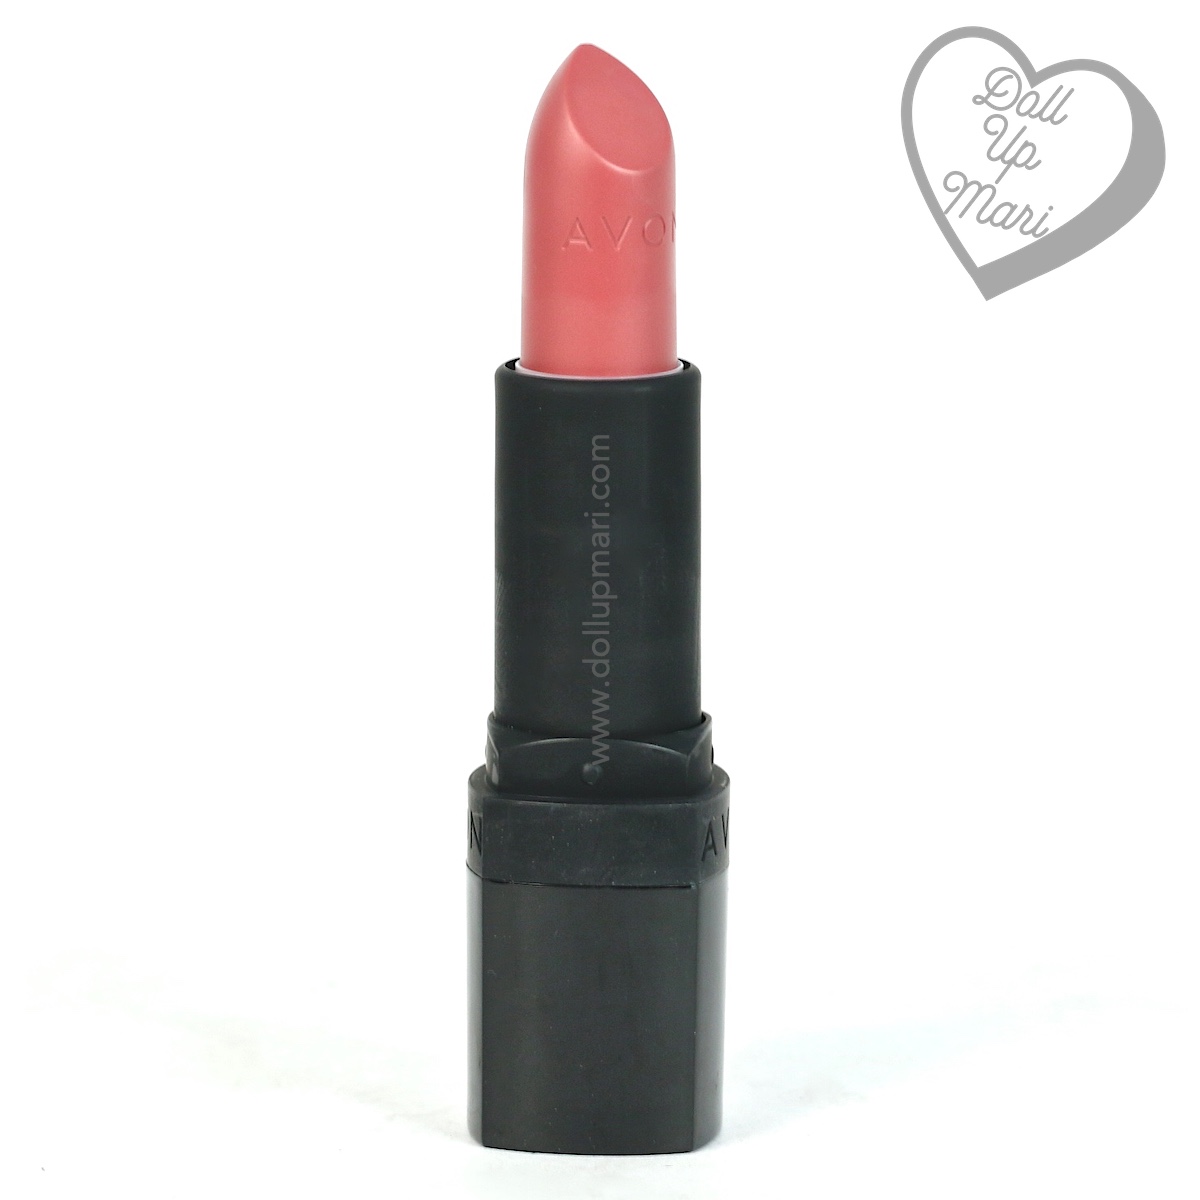 Pack Shot of Tempting Mauve shade of AVON Perfectly Matte Lipstick